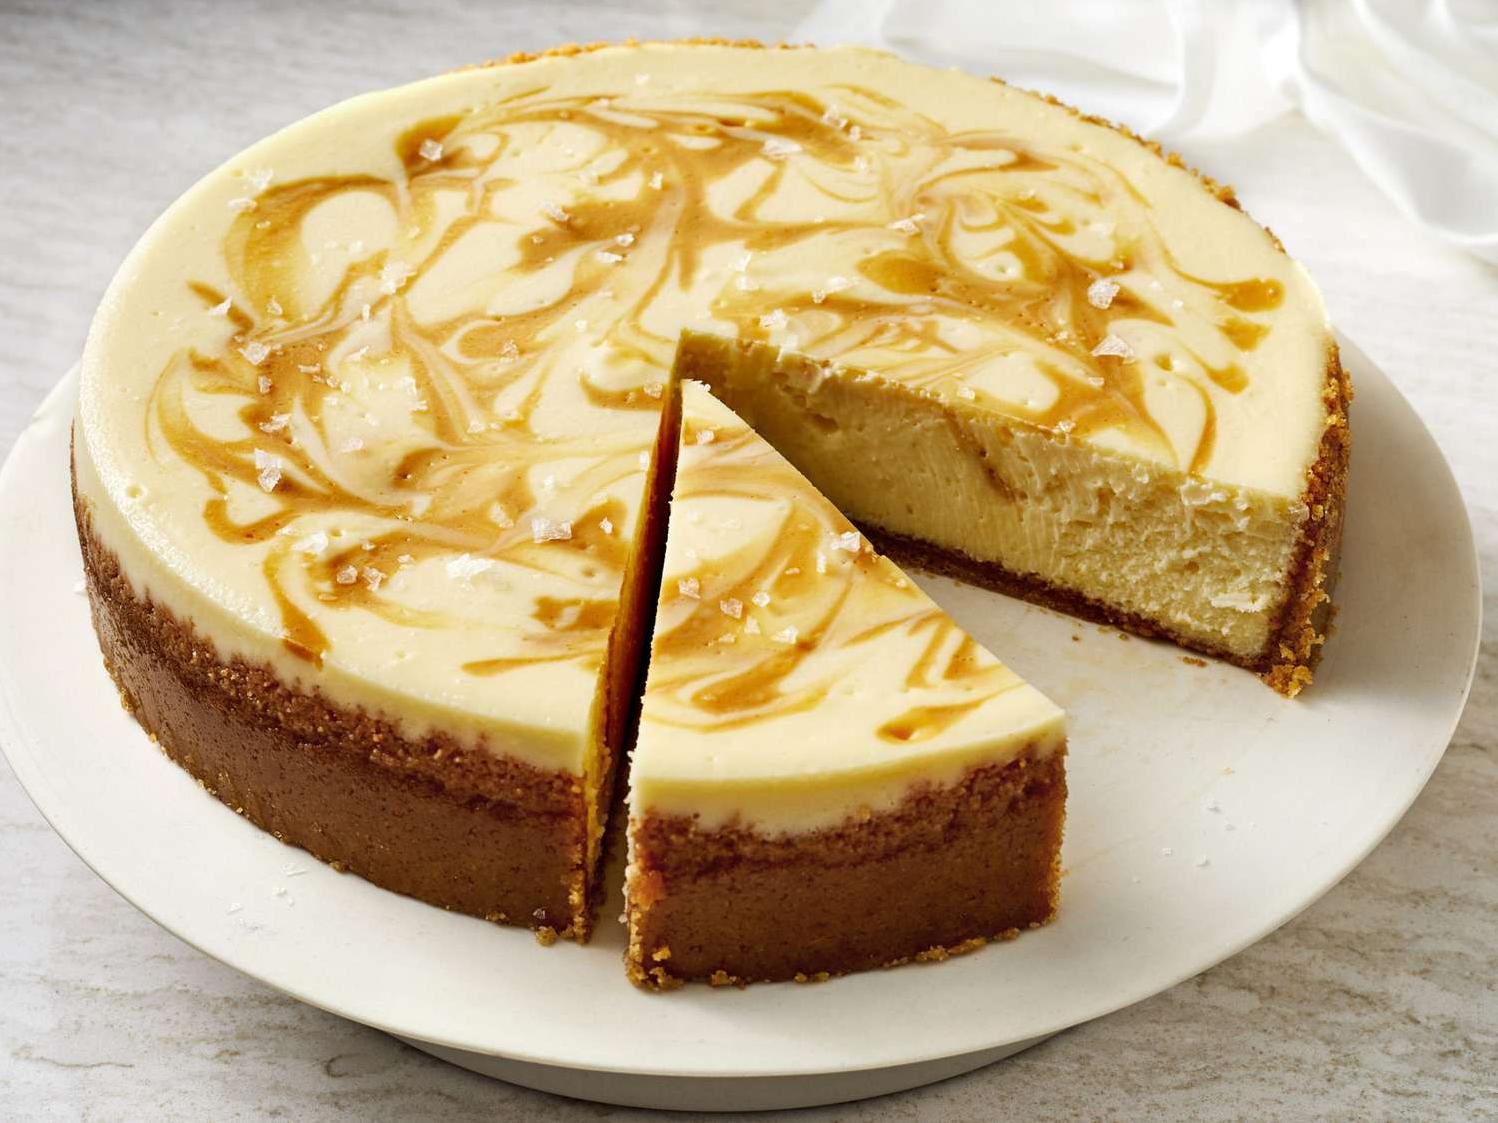  This Dulce de Leche Cheesecake is what dreams are made of!